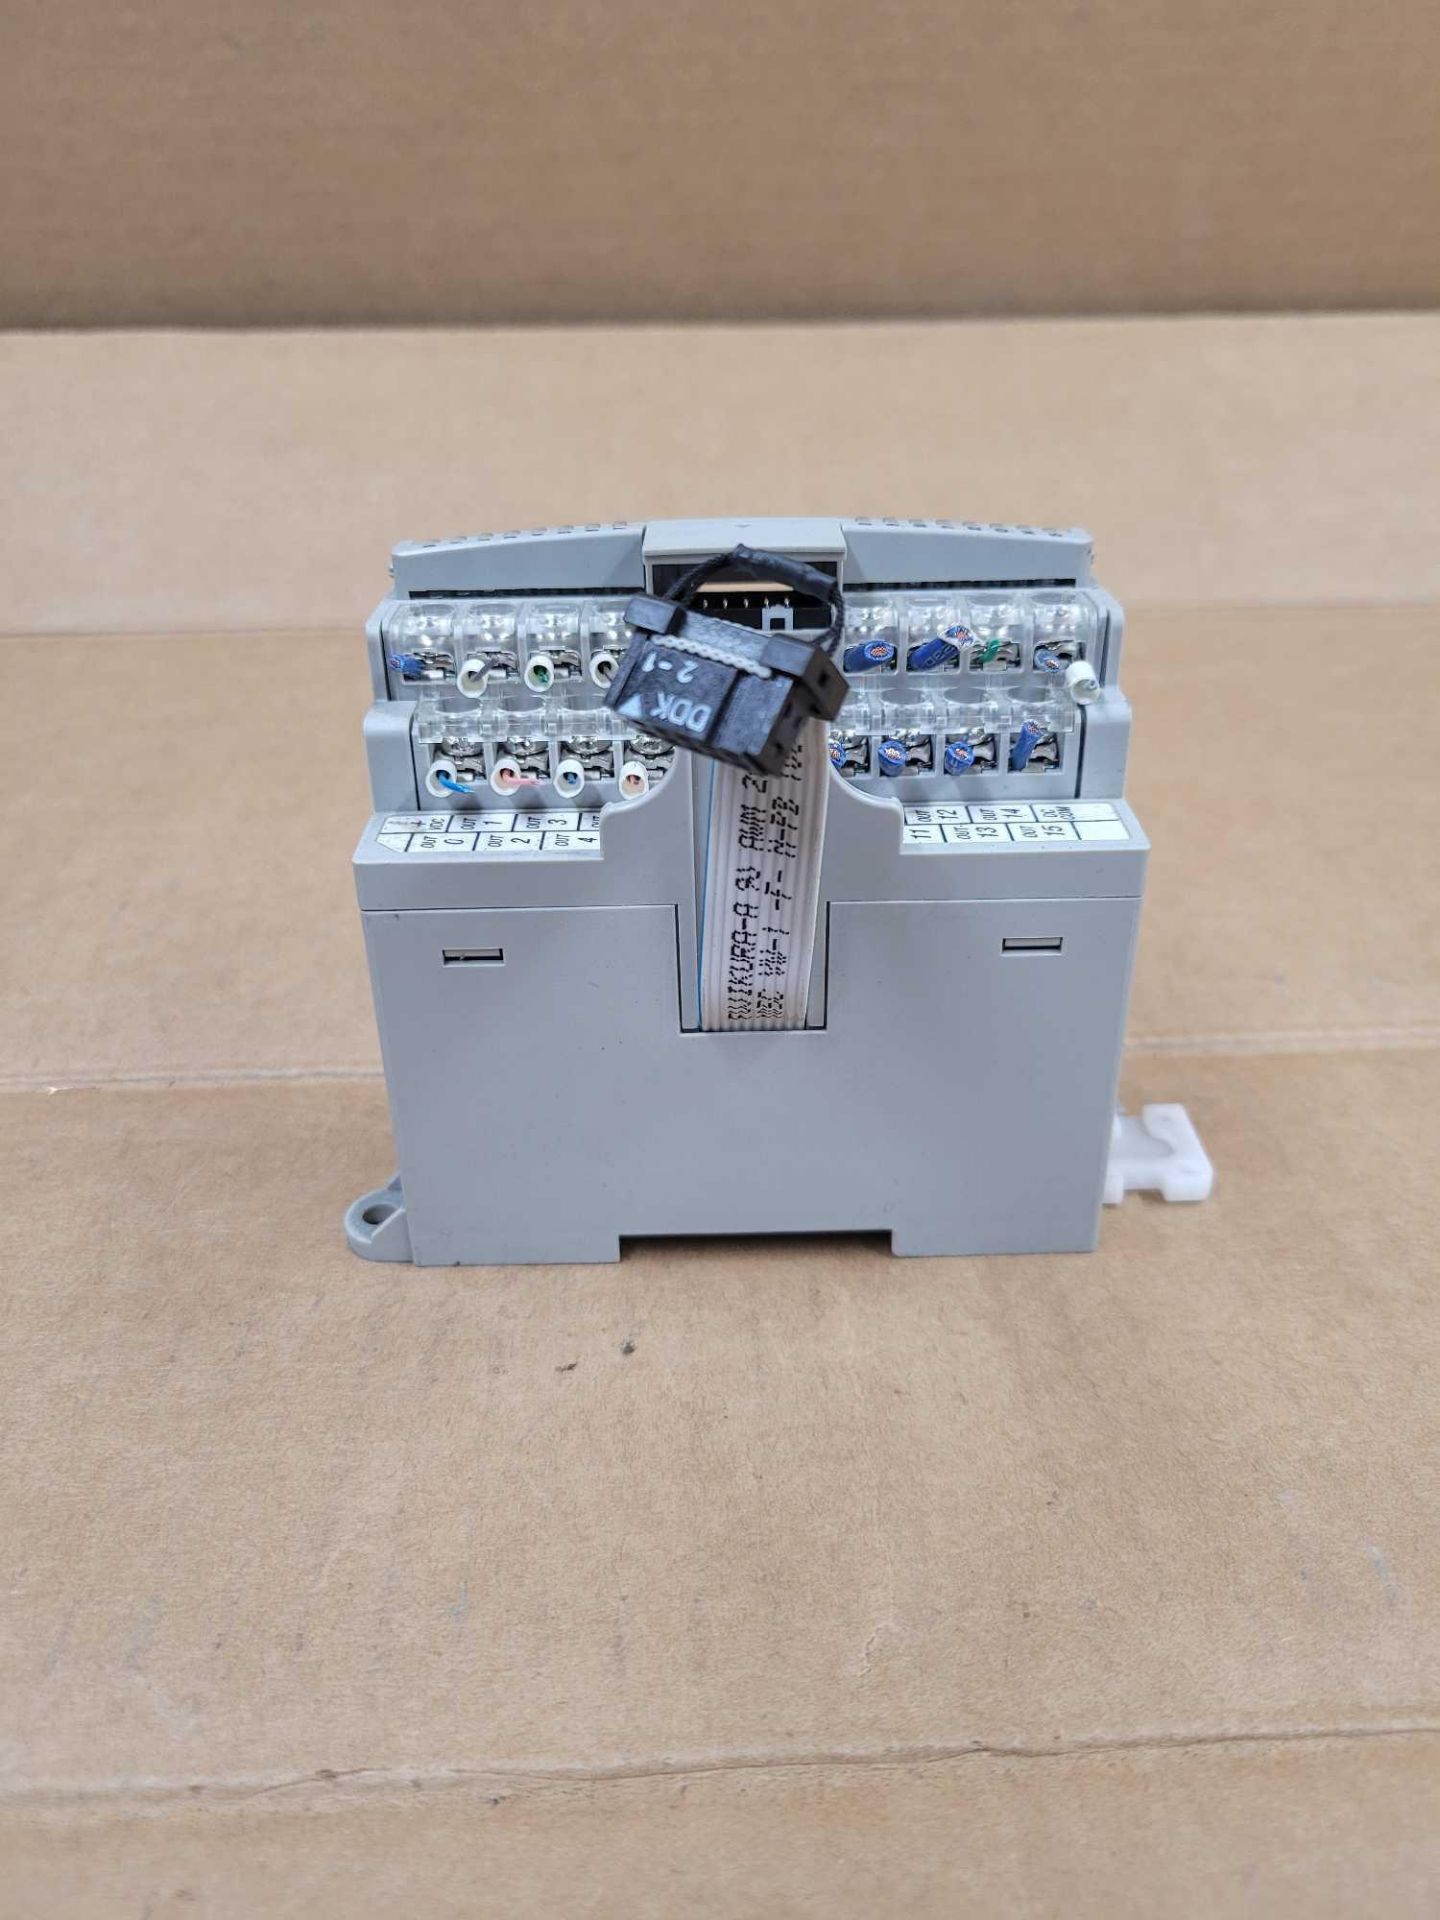 LOT OF 3 ALLEN BRADLEY 1762-OB16 / Series A MicroLogix Output Module  /  Lot Weight: 1.0 lbs - Image 5 of 11